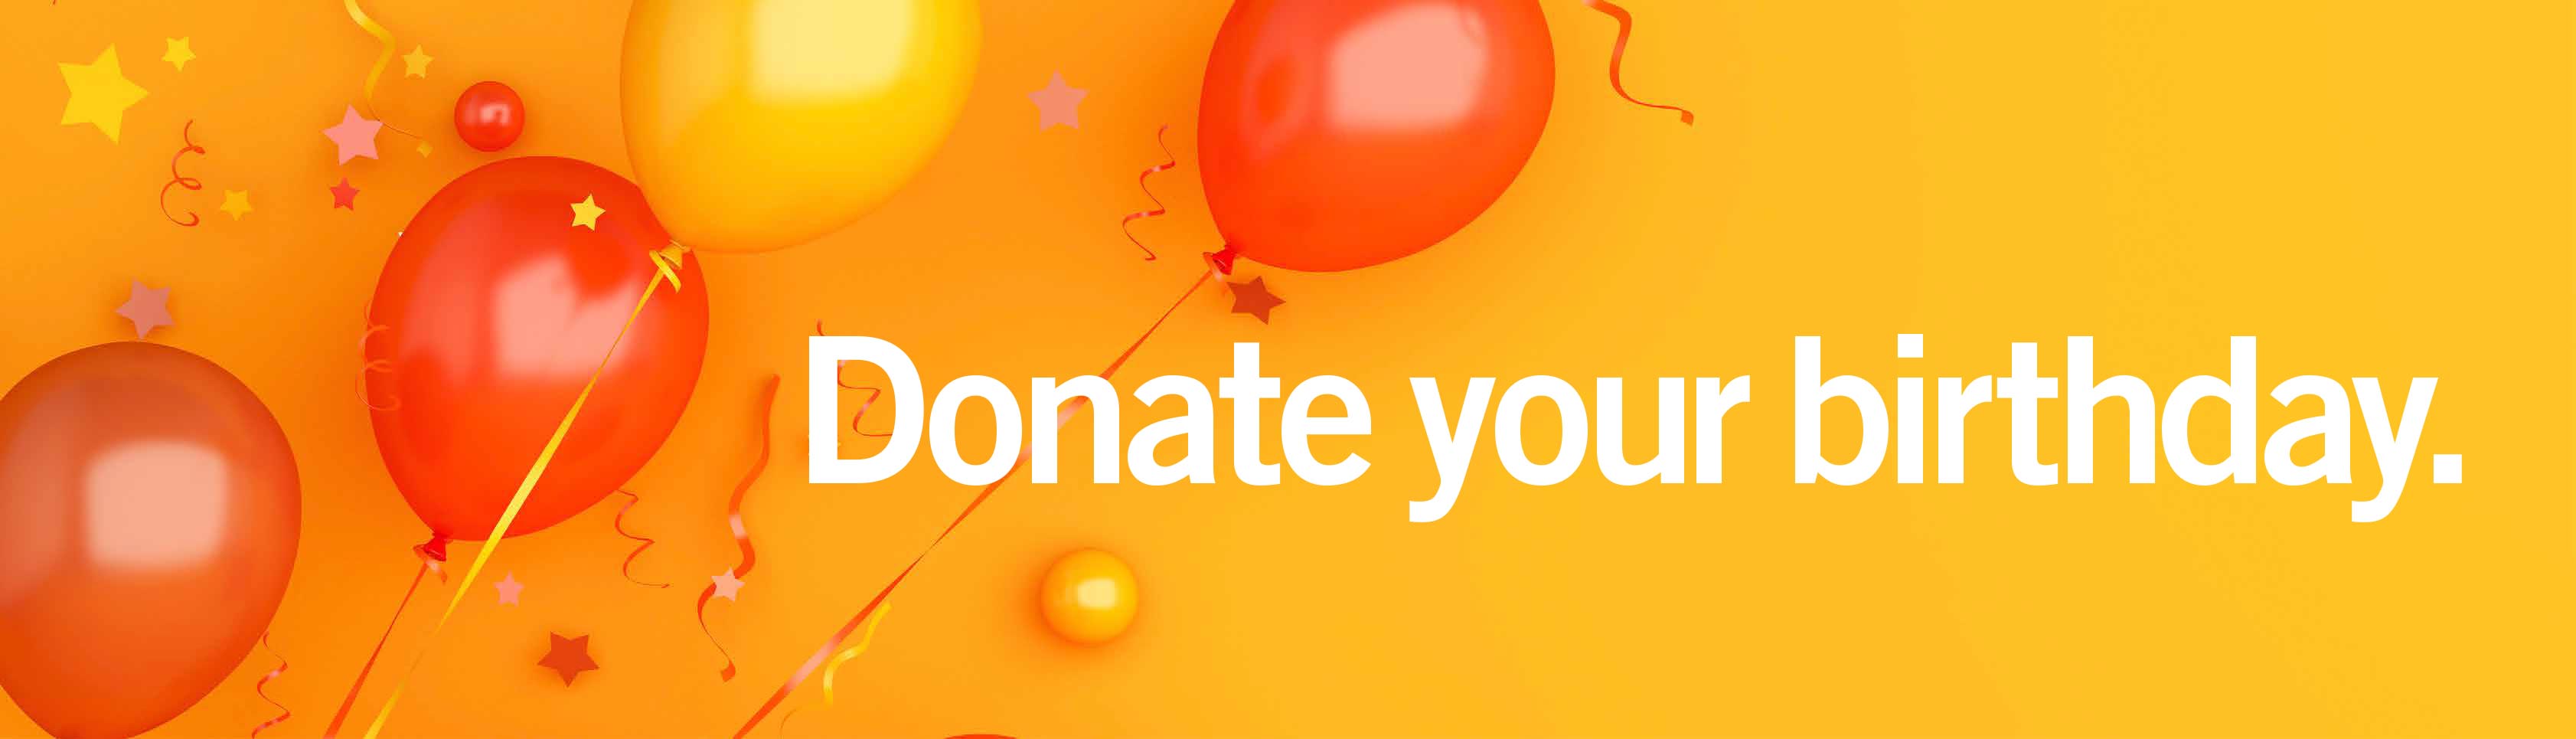 Donate your birthday banner